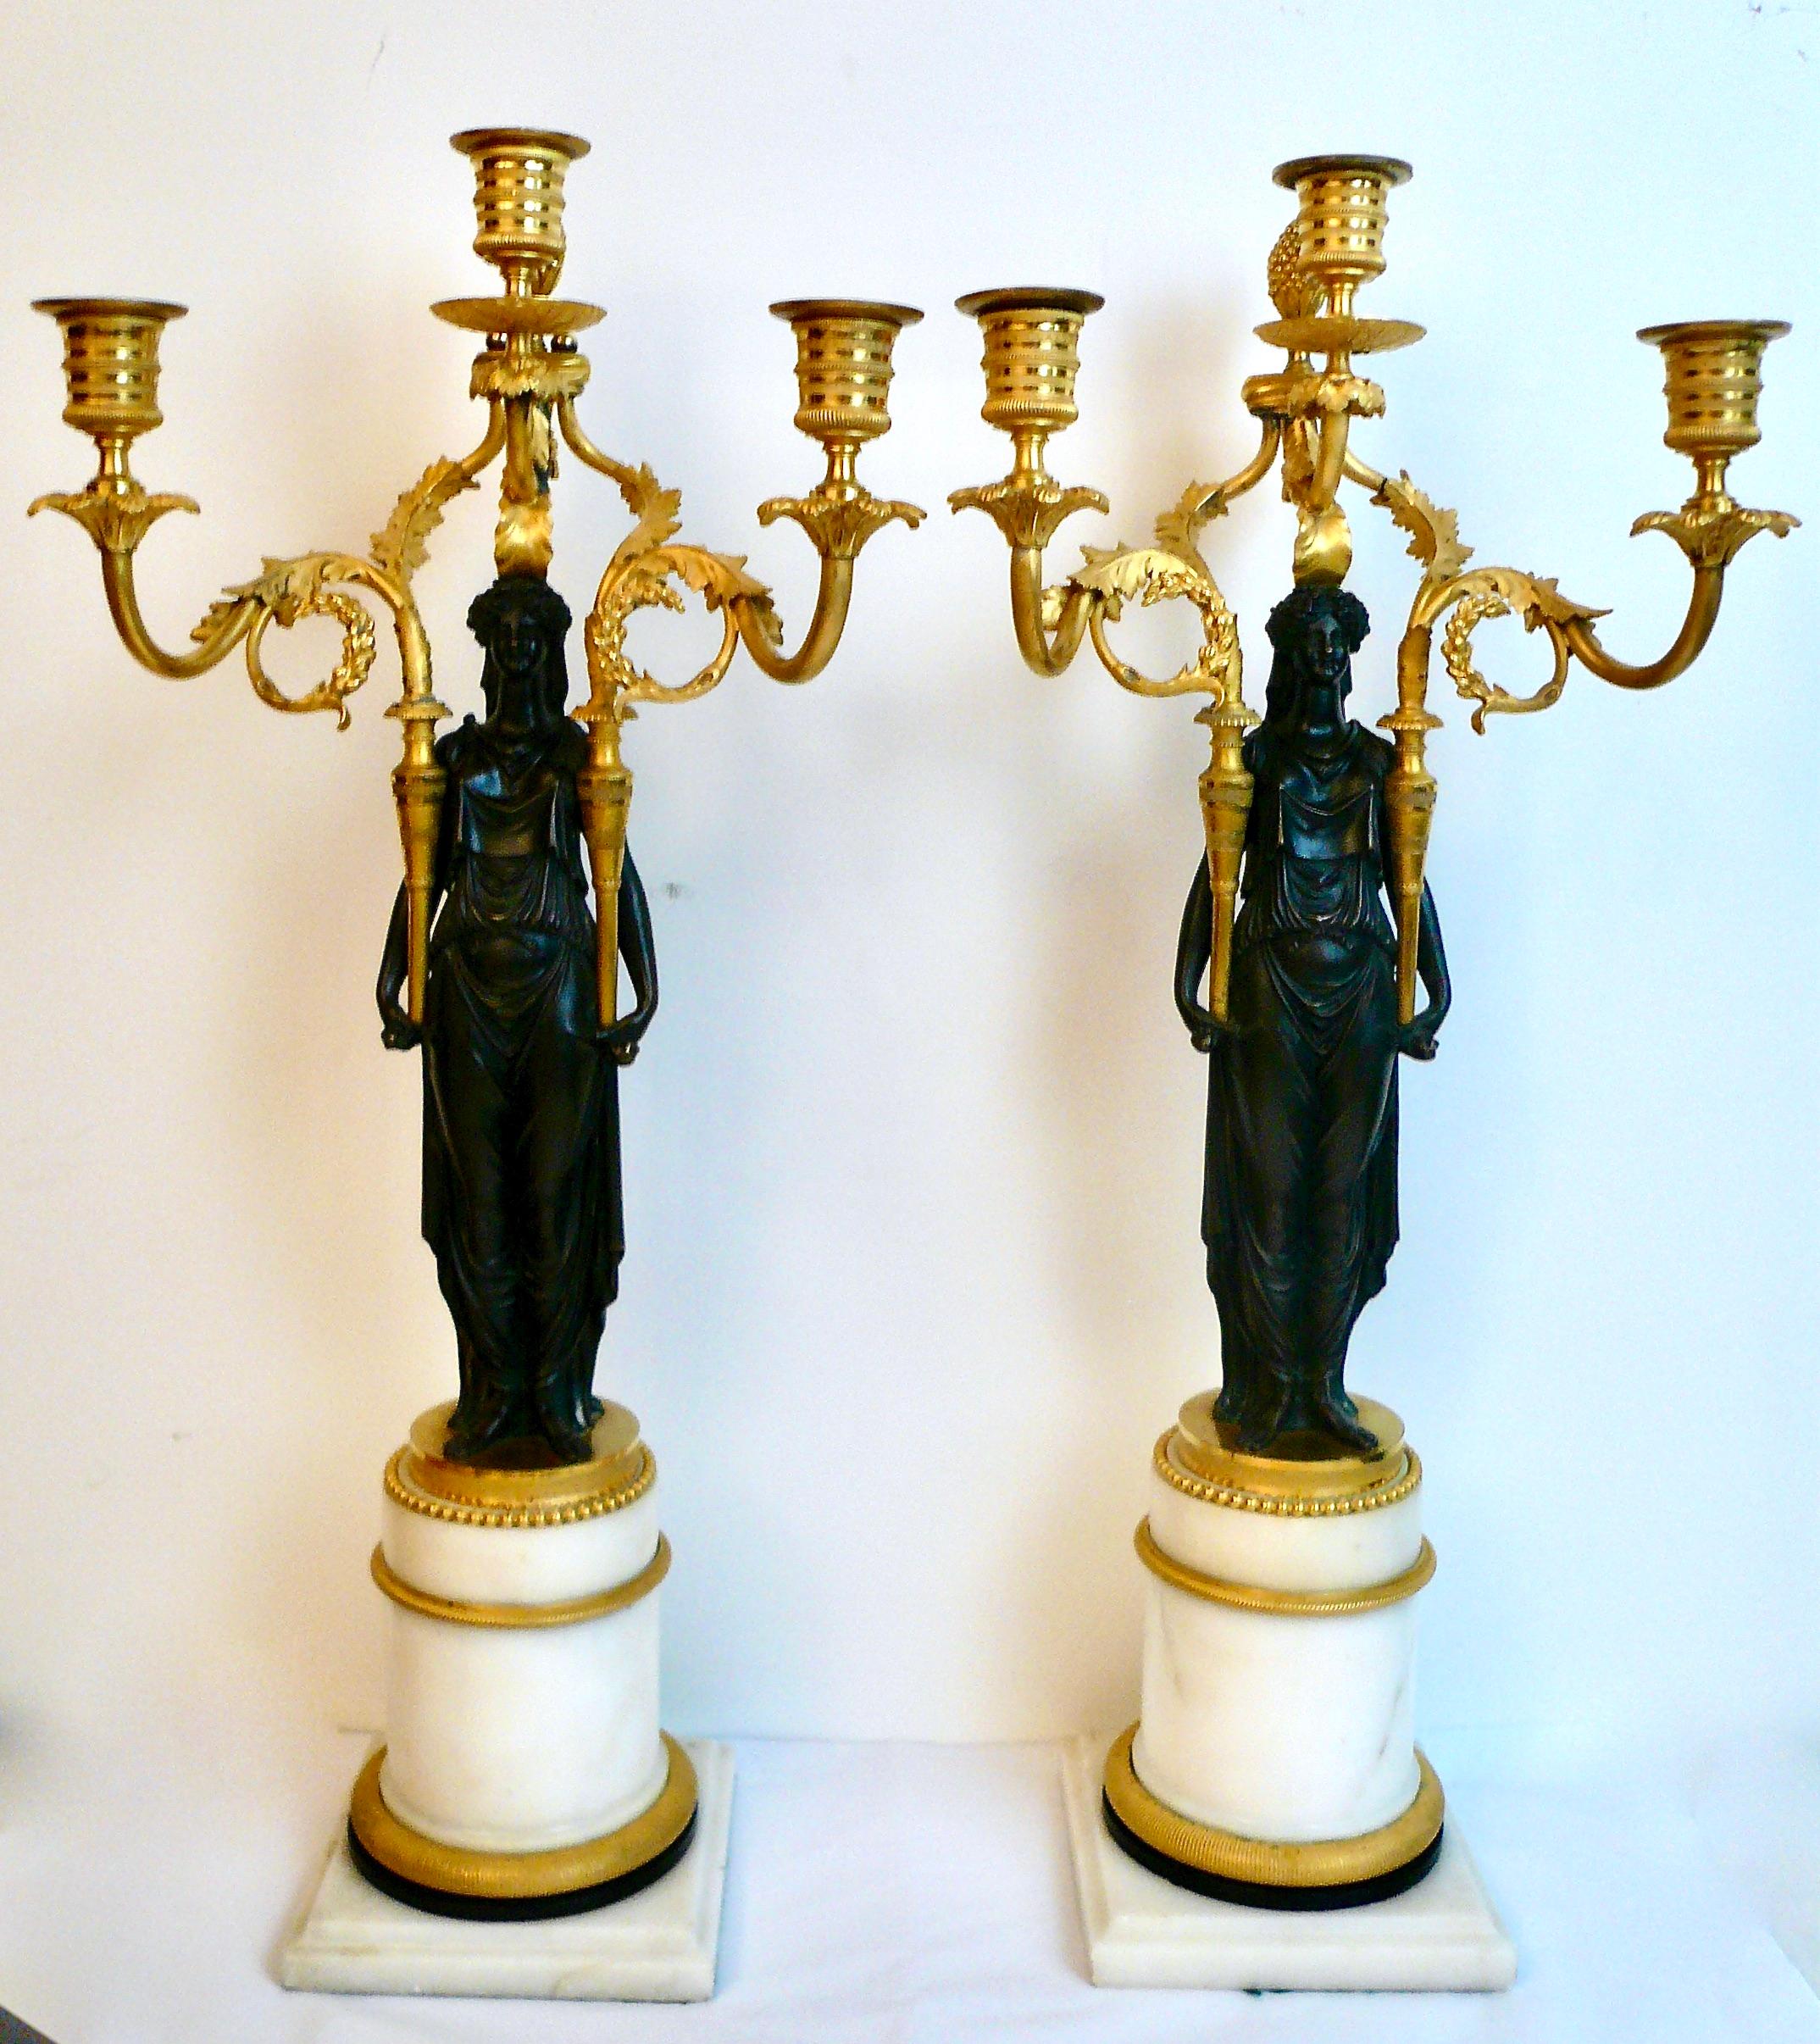 This amazing pair of Louis XVI / Directoire period candelabra are of the finest quality.
The figures are modeled as Roman Vestal Virgins issuing three scrolling acanthus leaf candle branches. They are mounted on Carrara marble colunmnar bases with